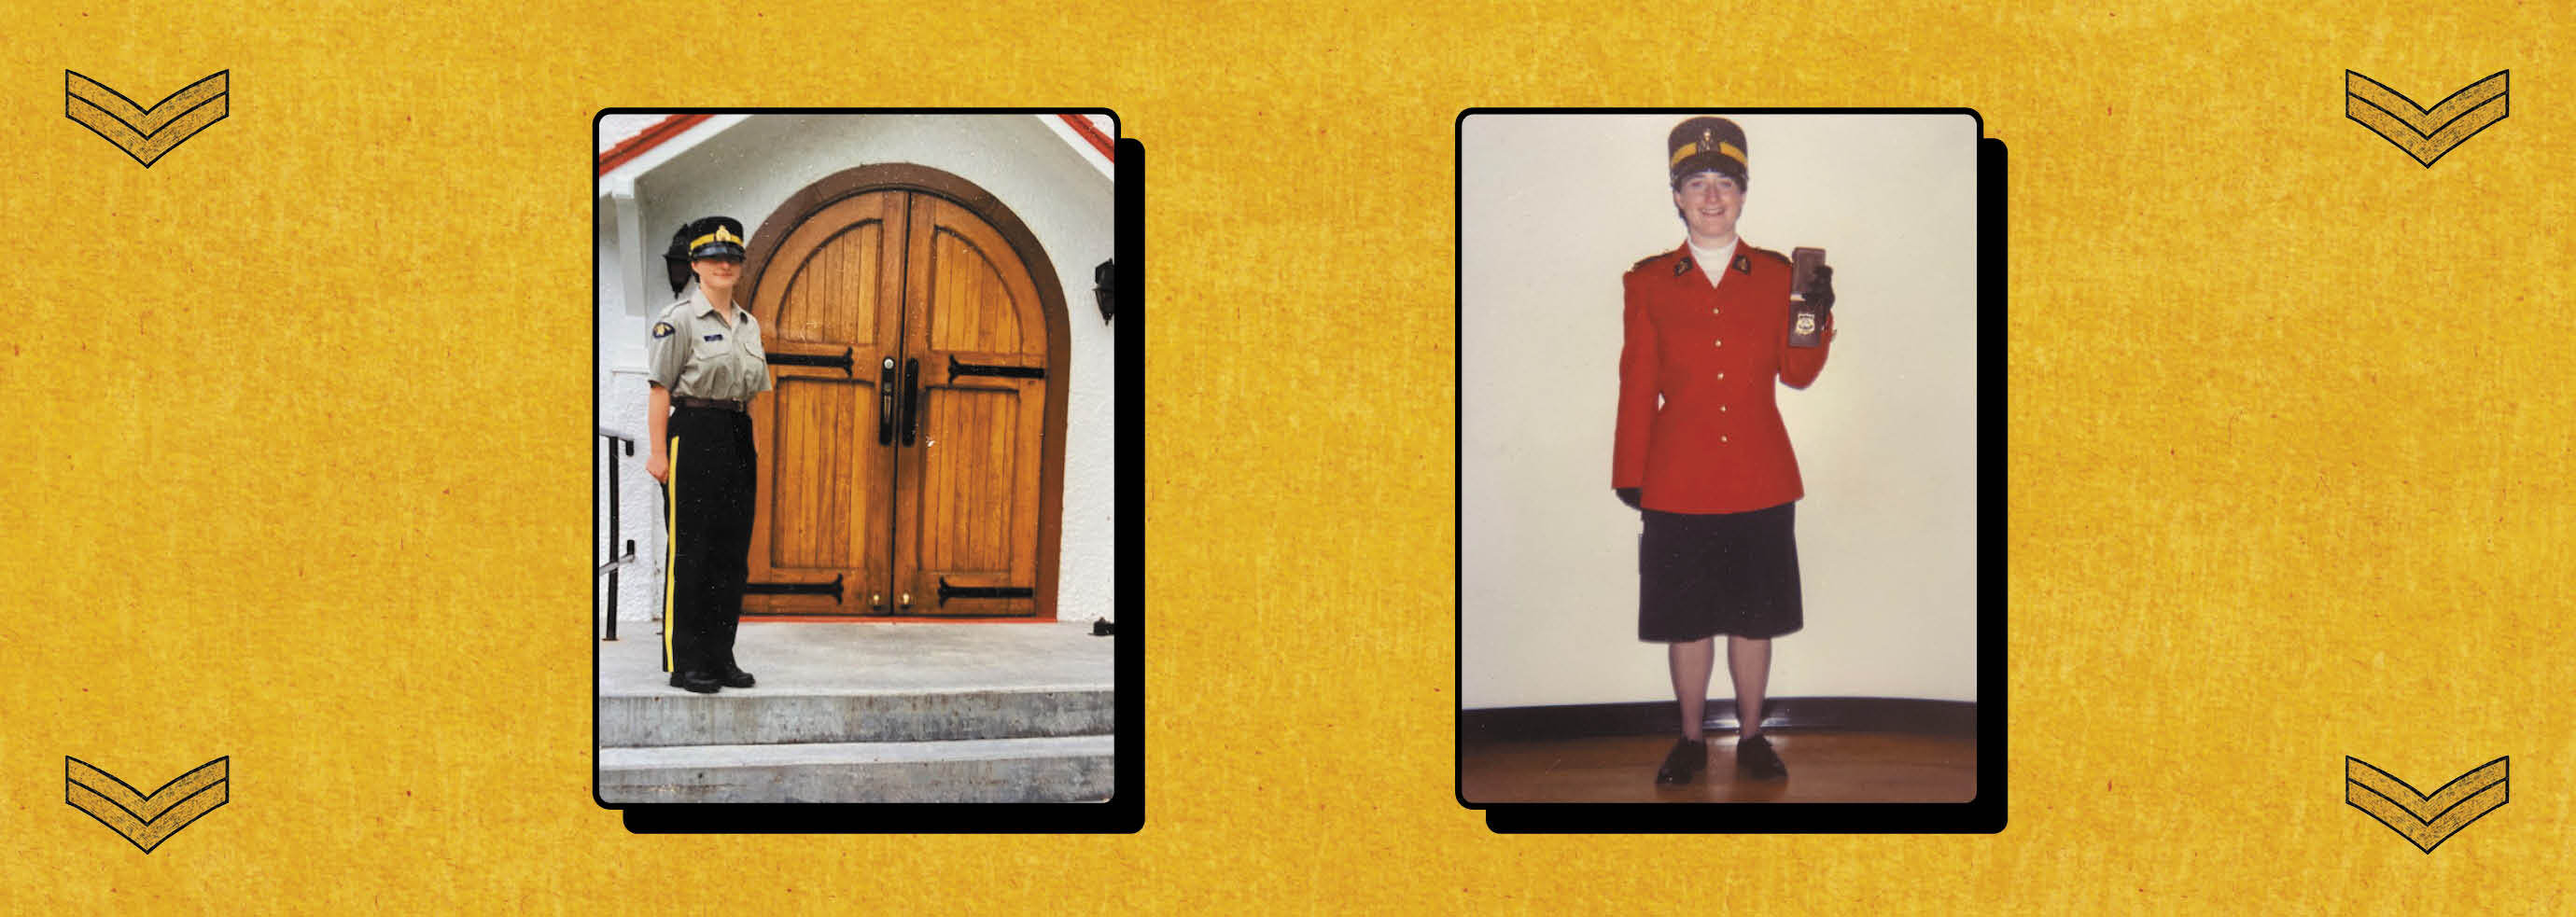 Two photos of Janet Merlo. Left: Merlo stands by a wooden door in a grey uniform shirt and black pants. Right: Merlo poses with her badge, wearing a red long-sleeved uniform shirt and black skirt.